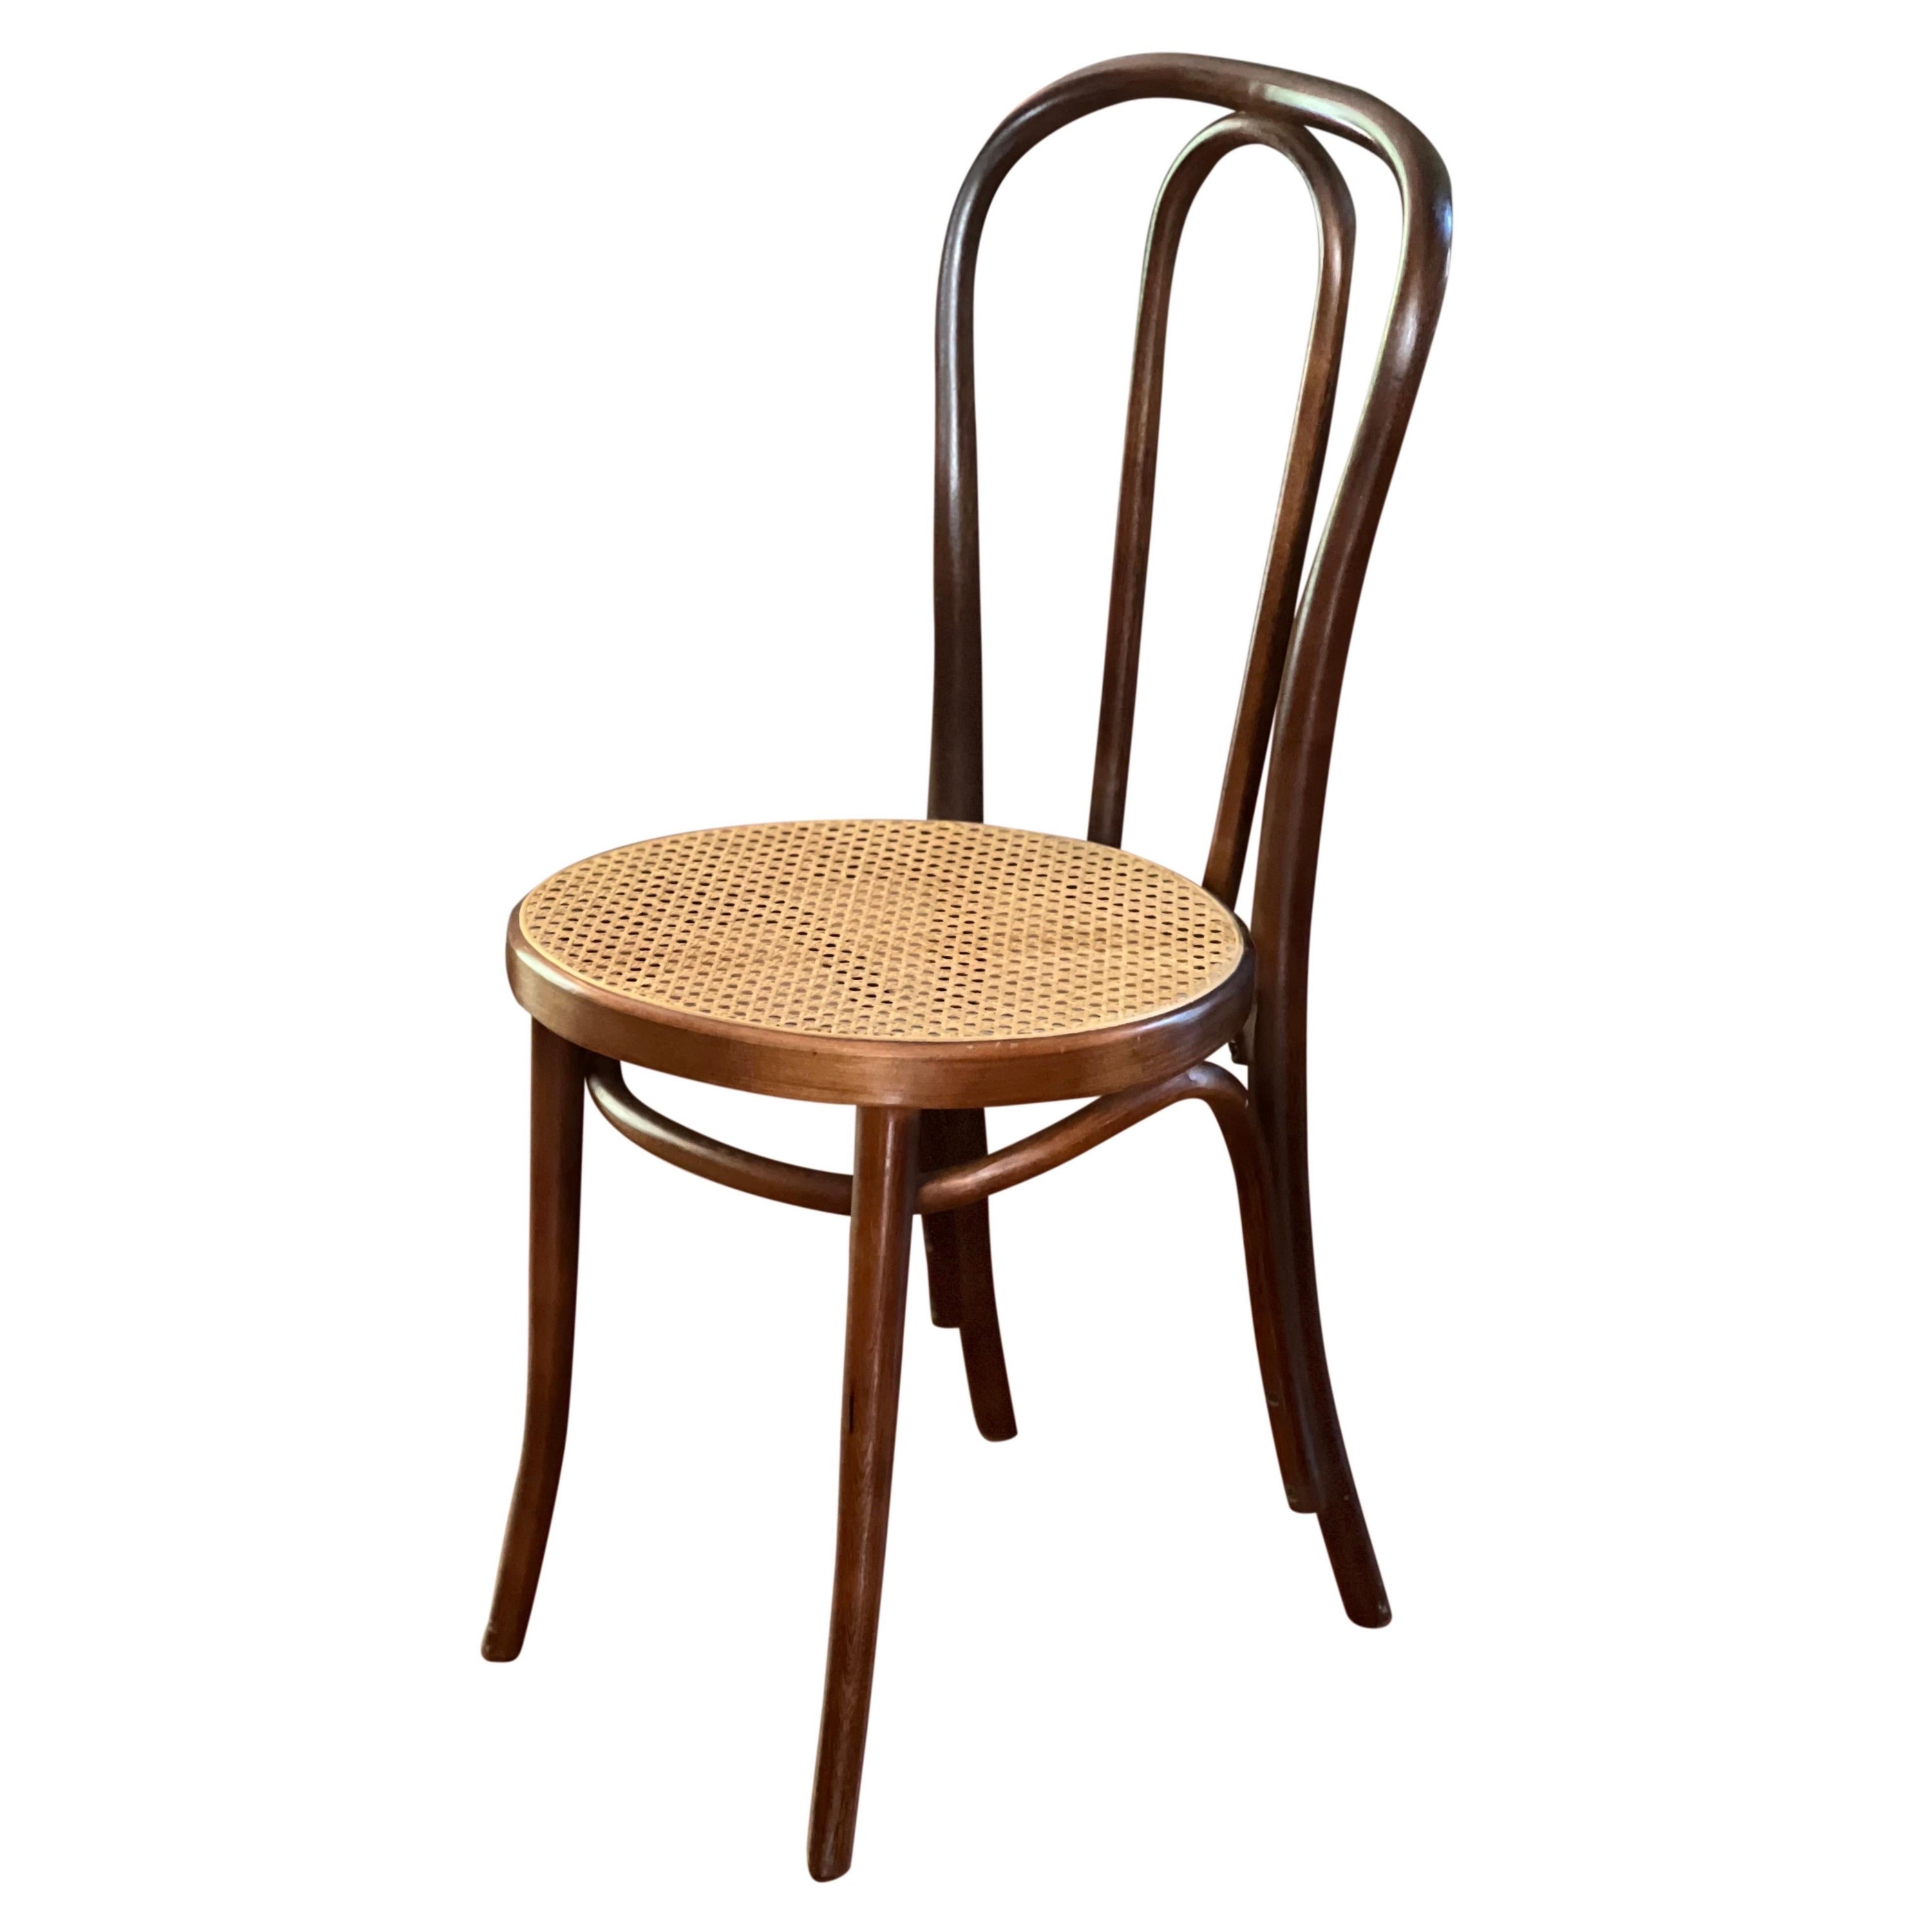 Thonet Bentwood Cane Bistro or Side Chair, 1920's For Sale